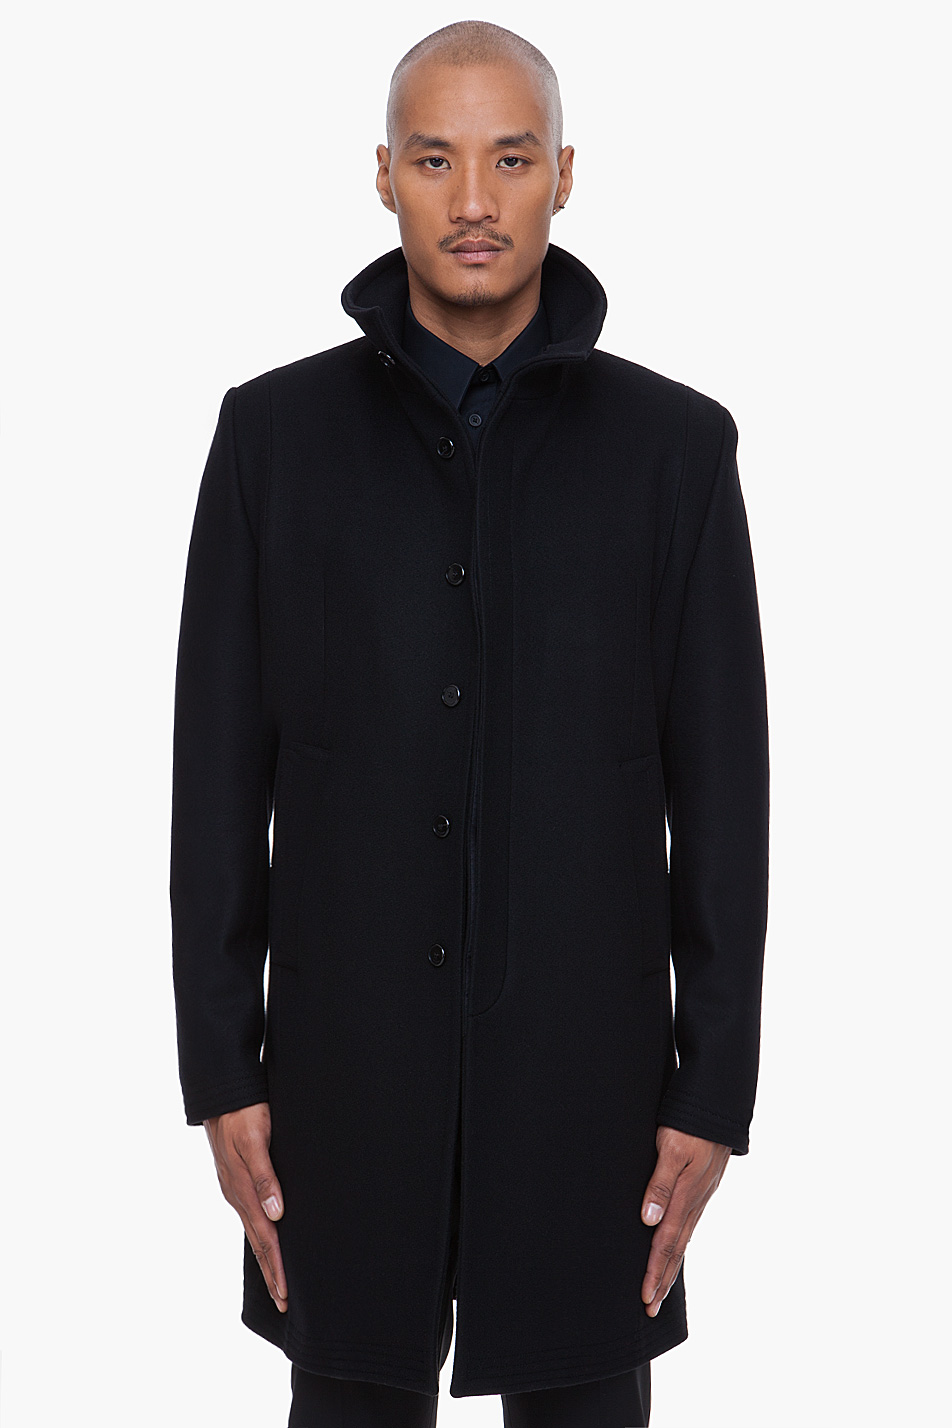 Lyst - Givenchy Wool Cashmere Officer Coat in Black for Men